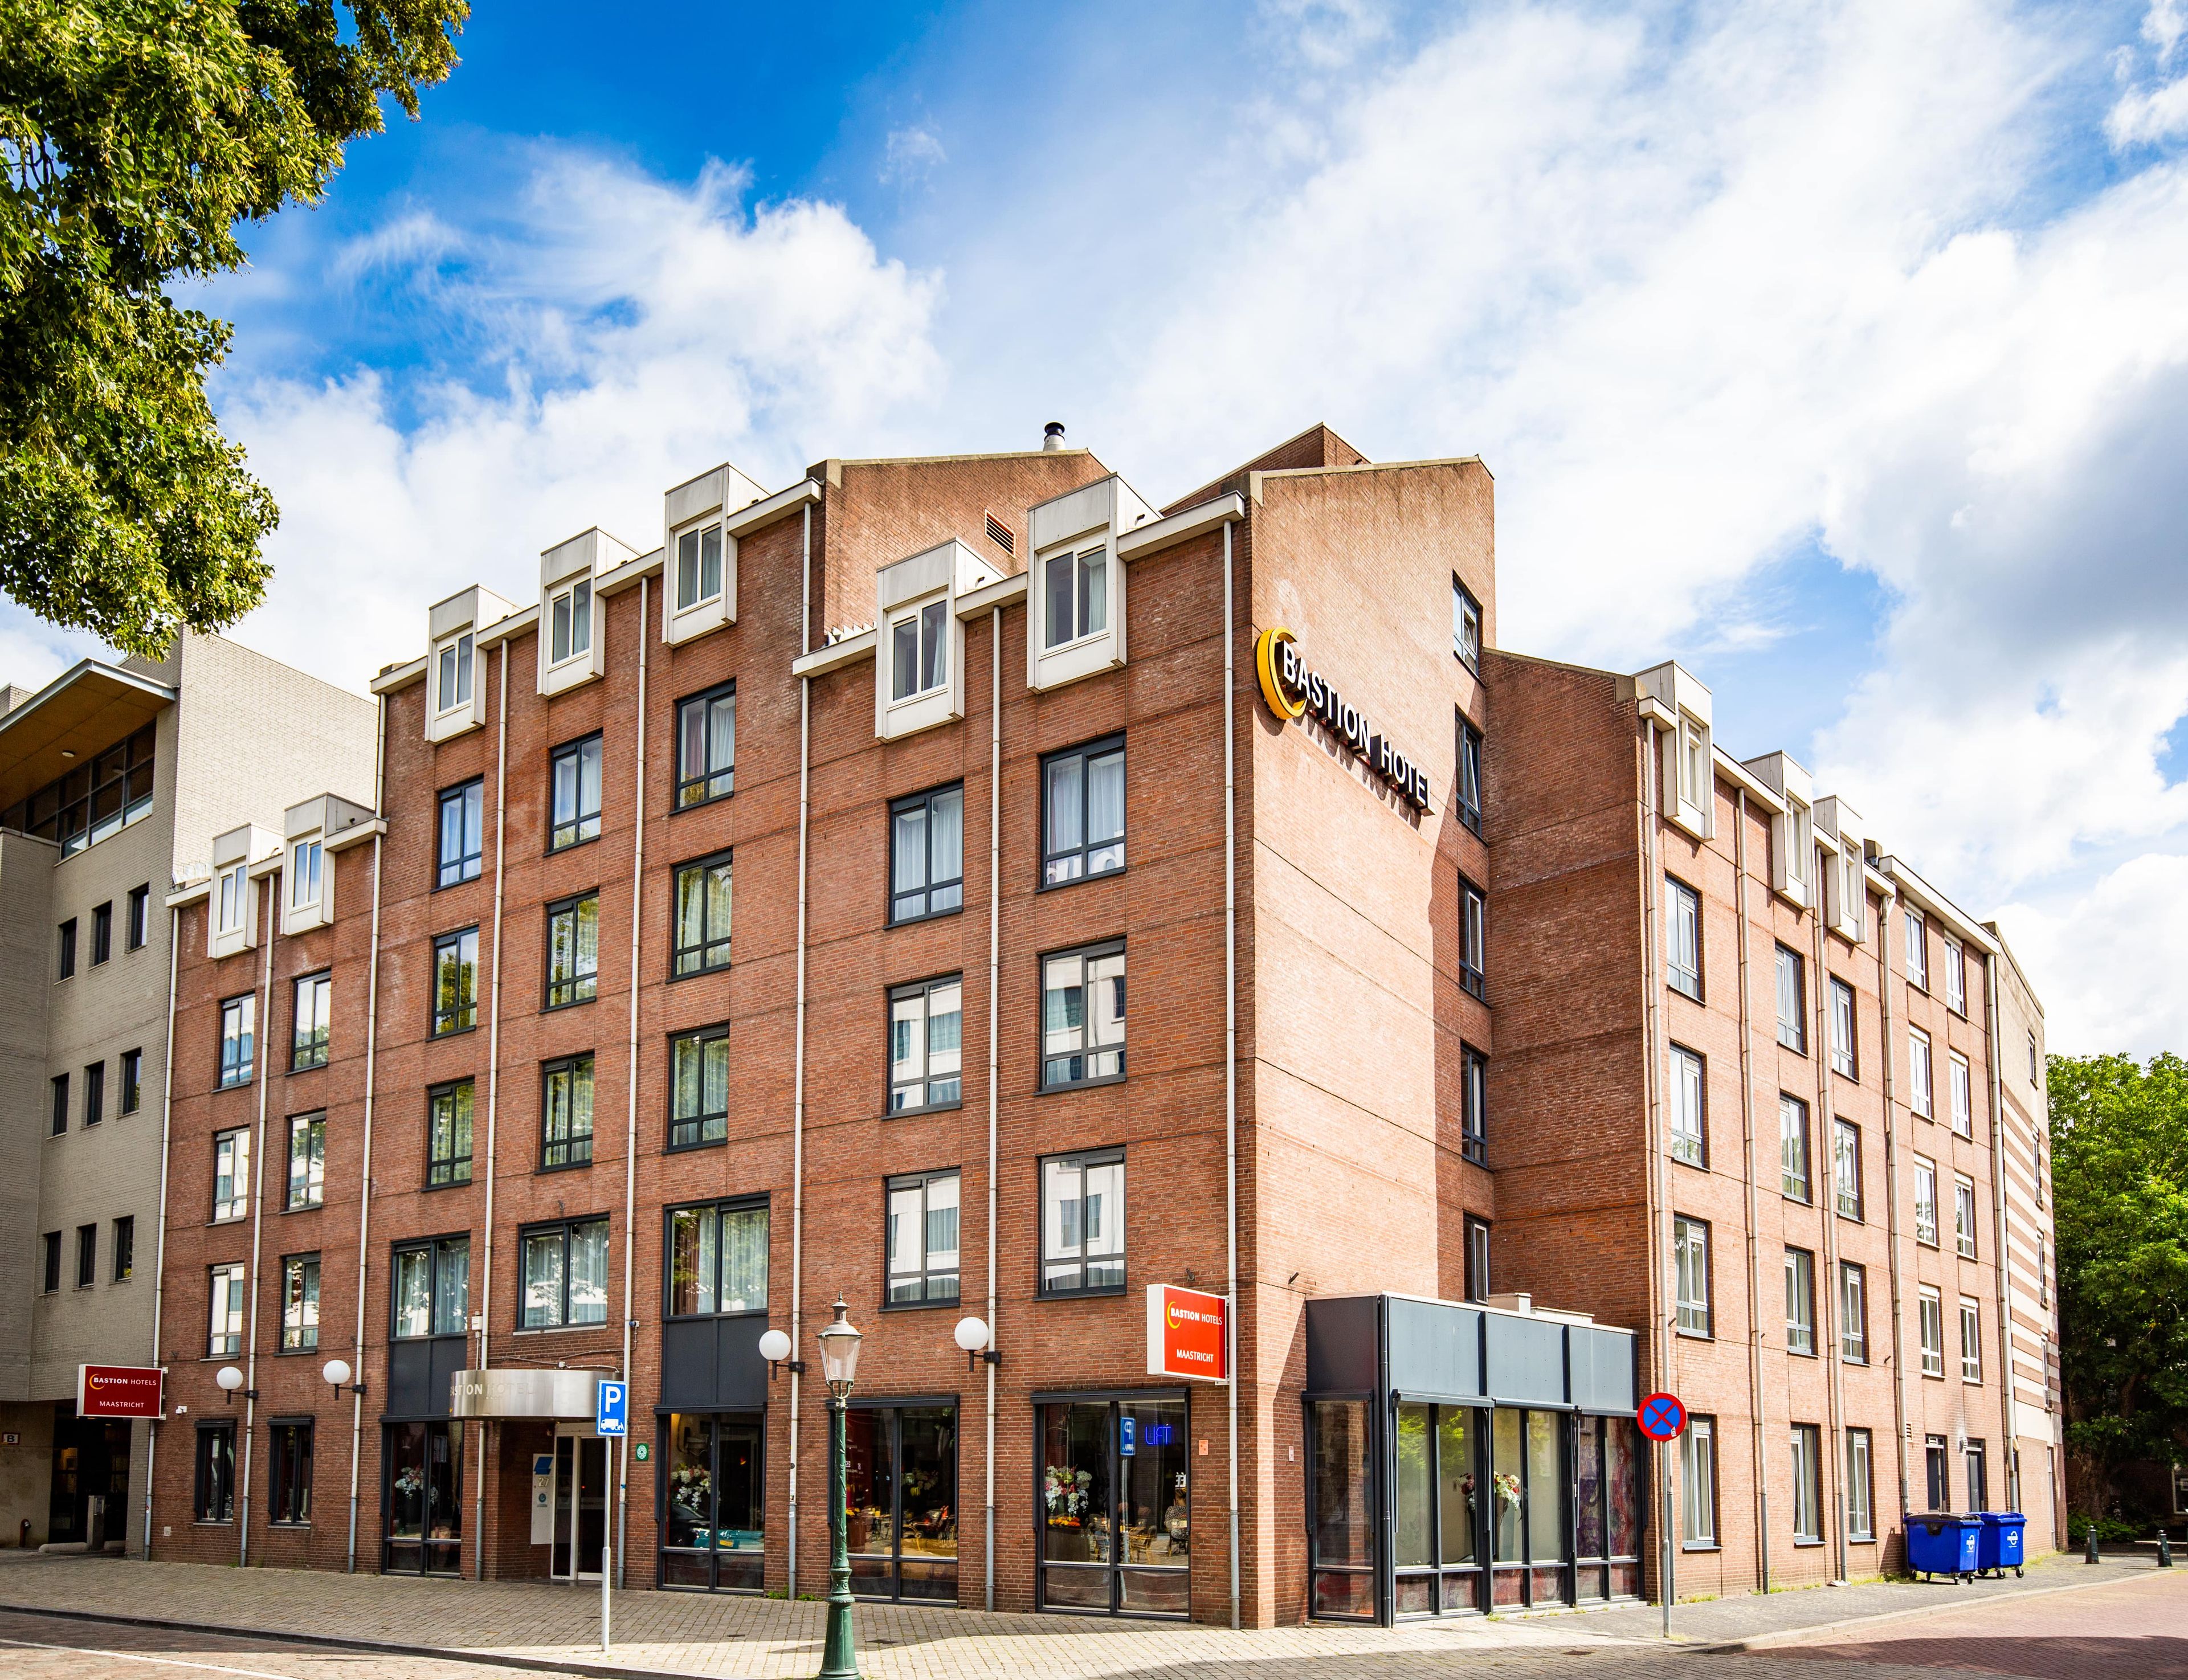 Bastion Hotel Maastricht Centrum <br/>59.00 ew <br/> <a href='http://vakantieoplossing.nl/outpage/?id=1b4b743f5c5c9480d3f6a52d2af3940e' target='_blank'>View Details</a>